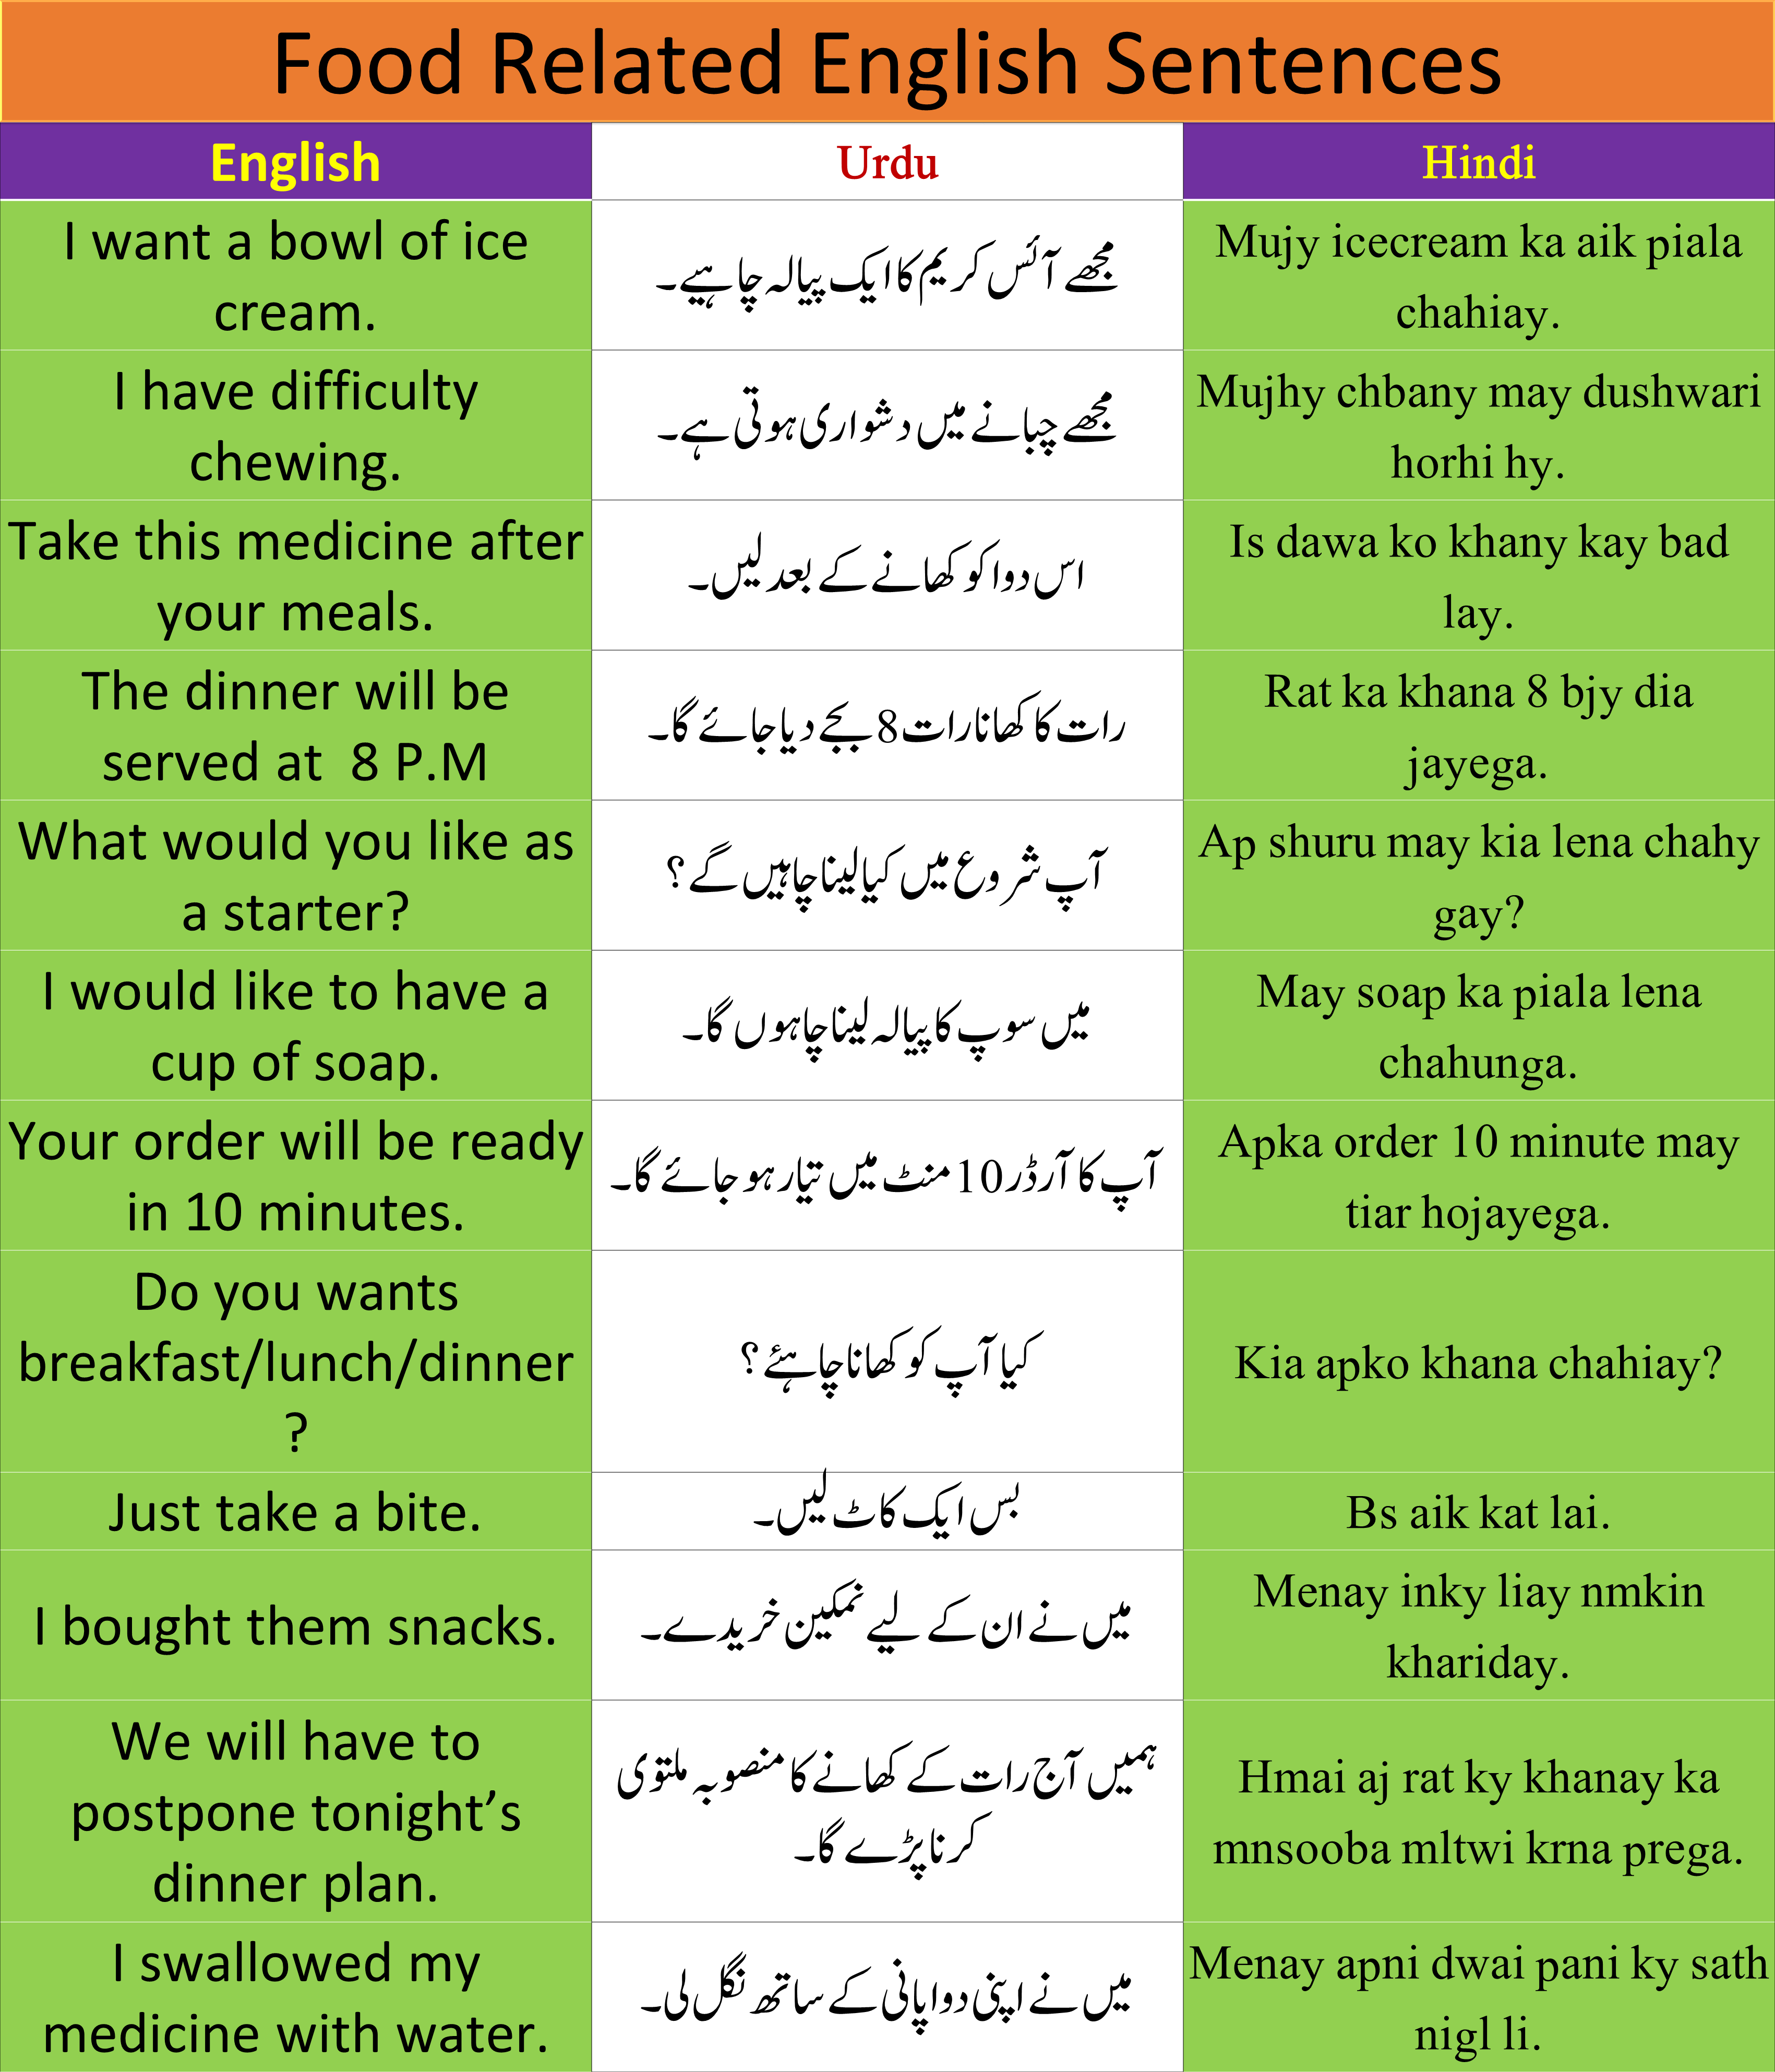 Important English Sentences Related To Food/ Meals With Urdu And Hindi Translation